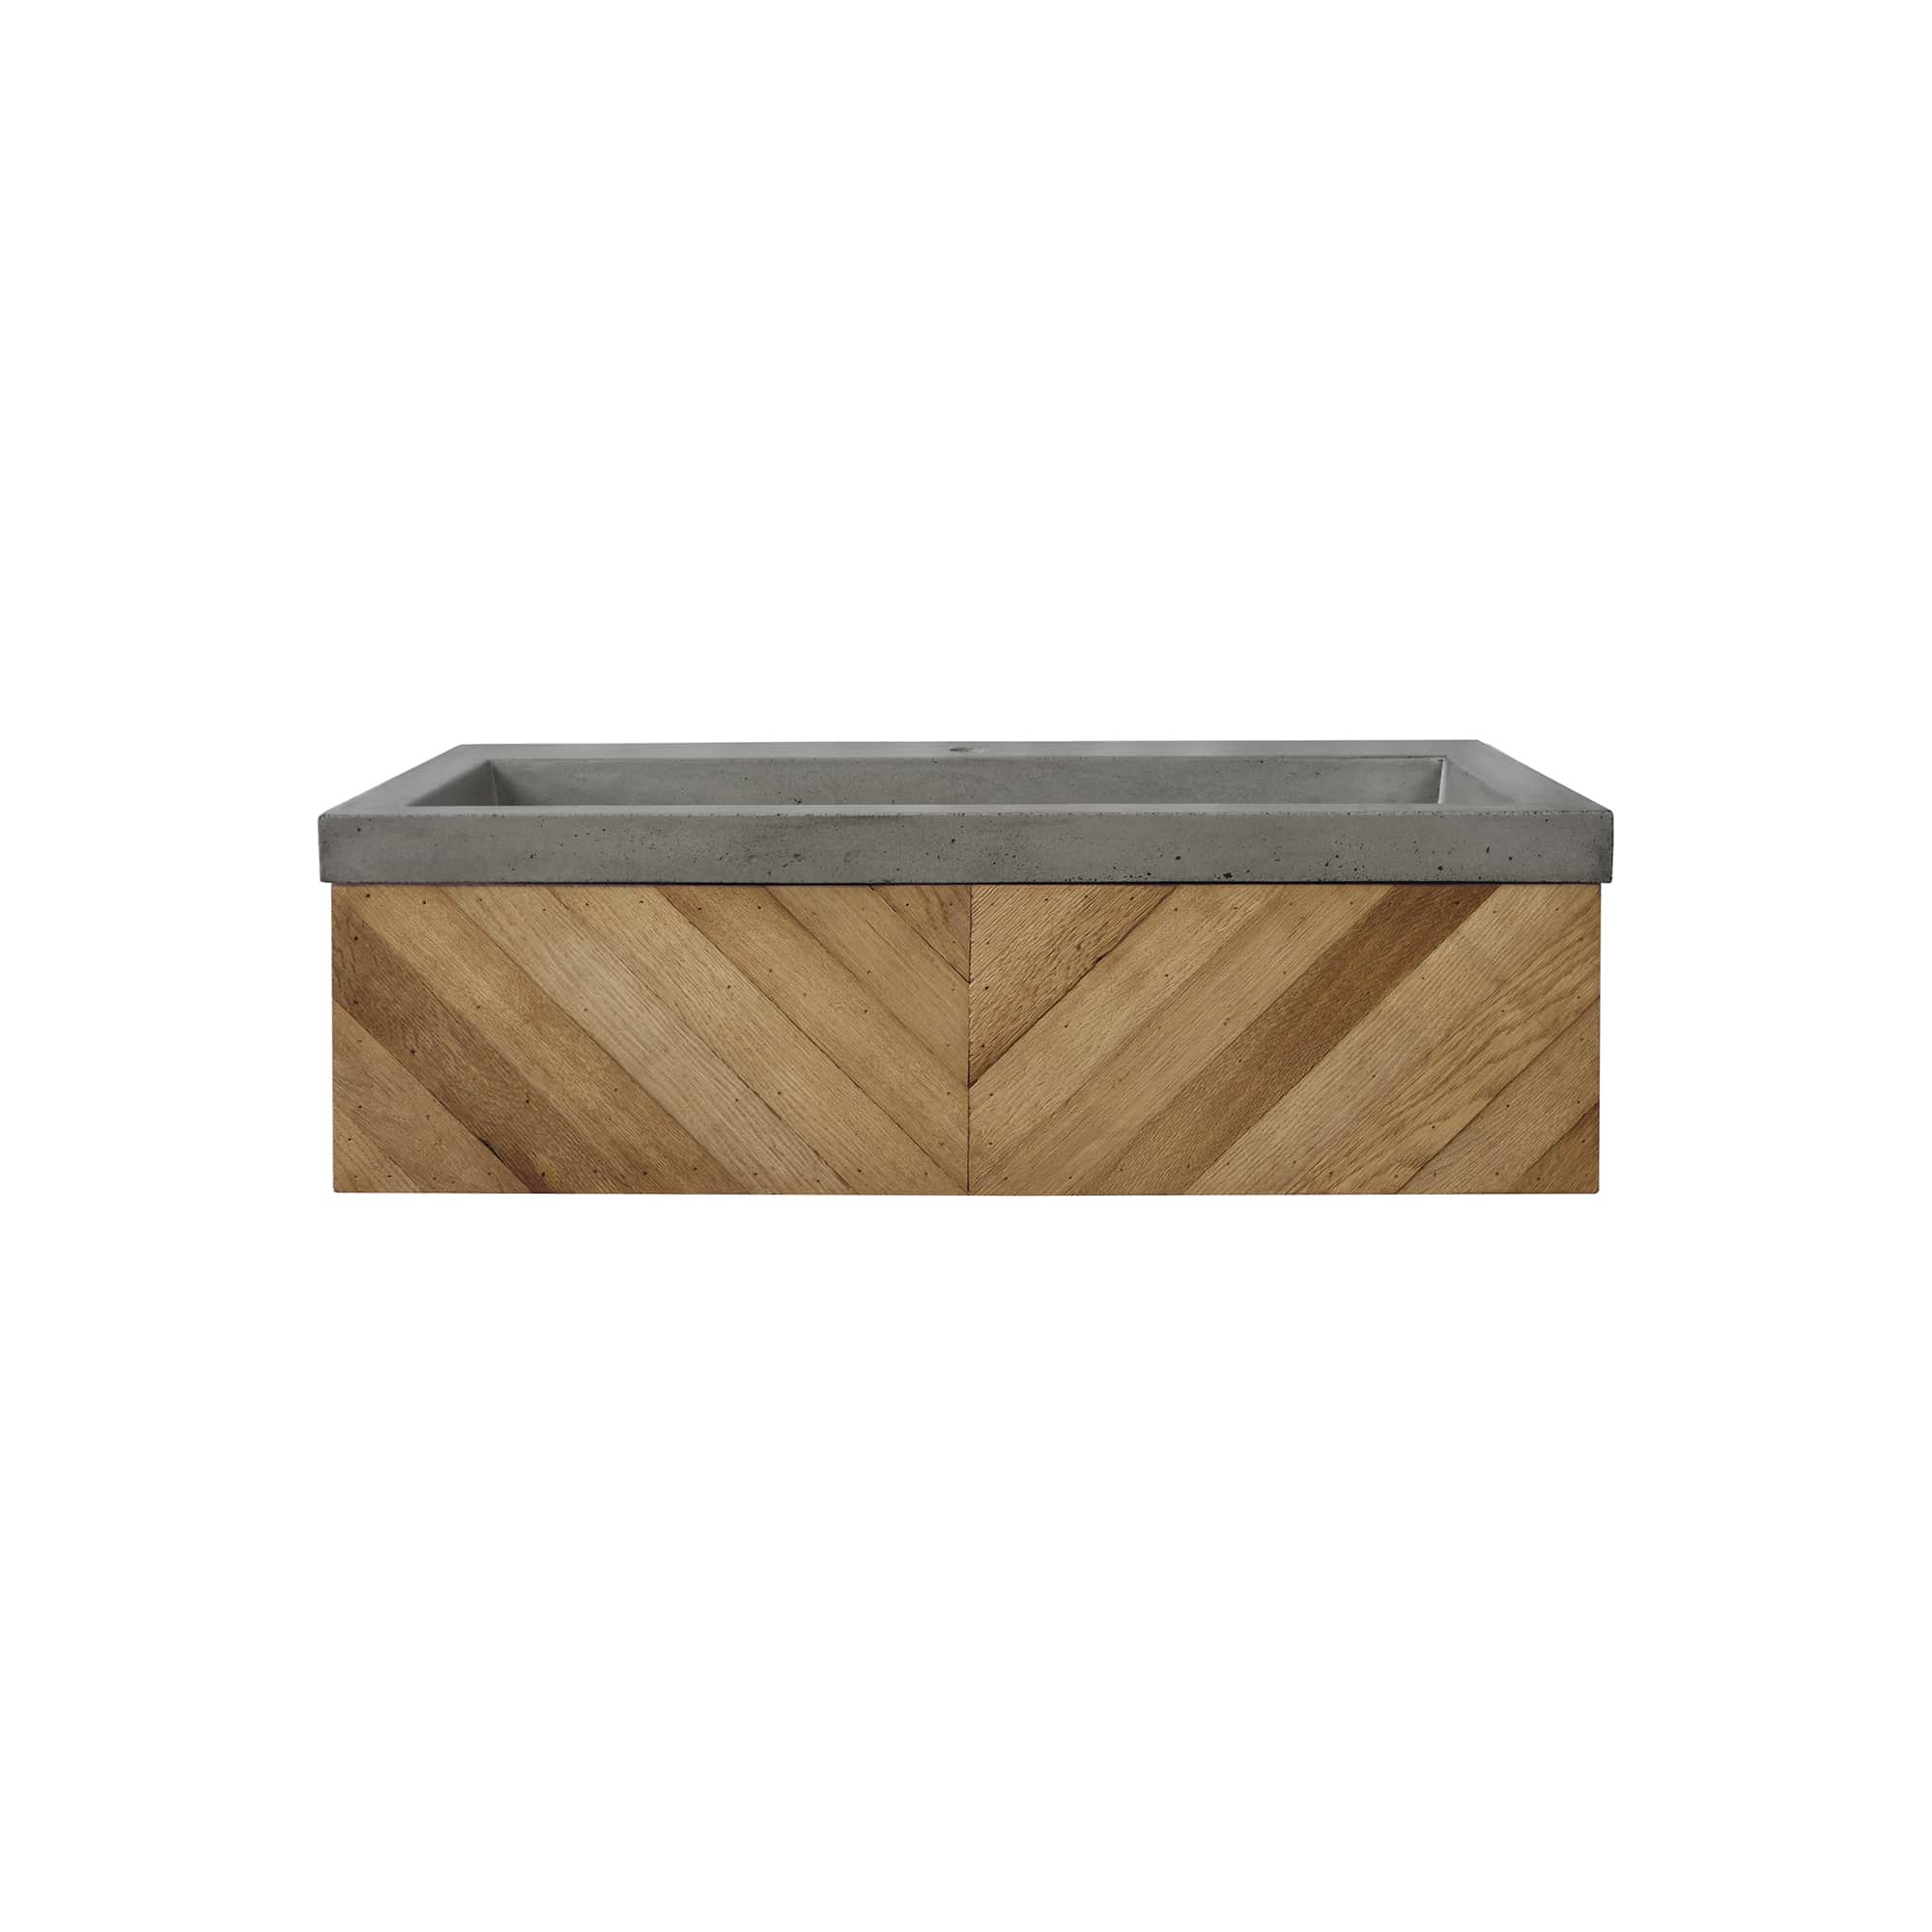 Native Trails 36 inch chardonnay floating vanity with nativestone trough sink in ash vnw191-nsl3619-a